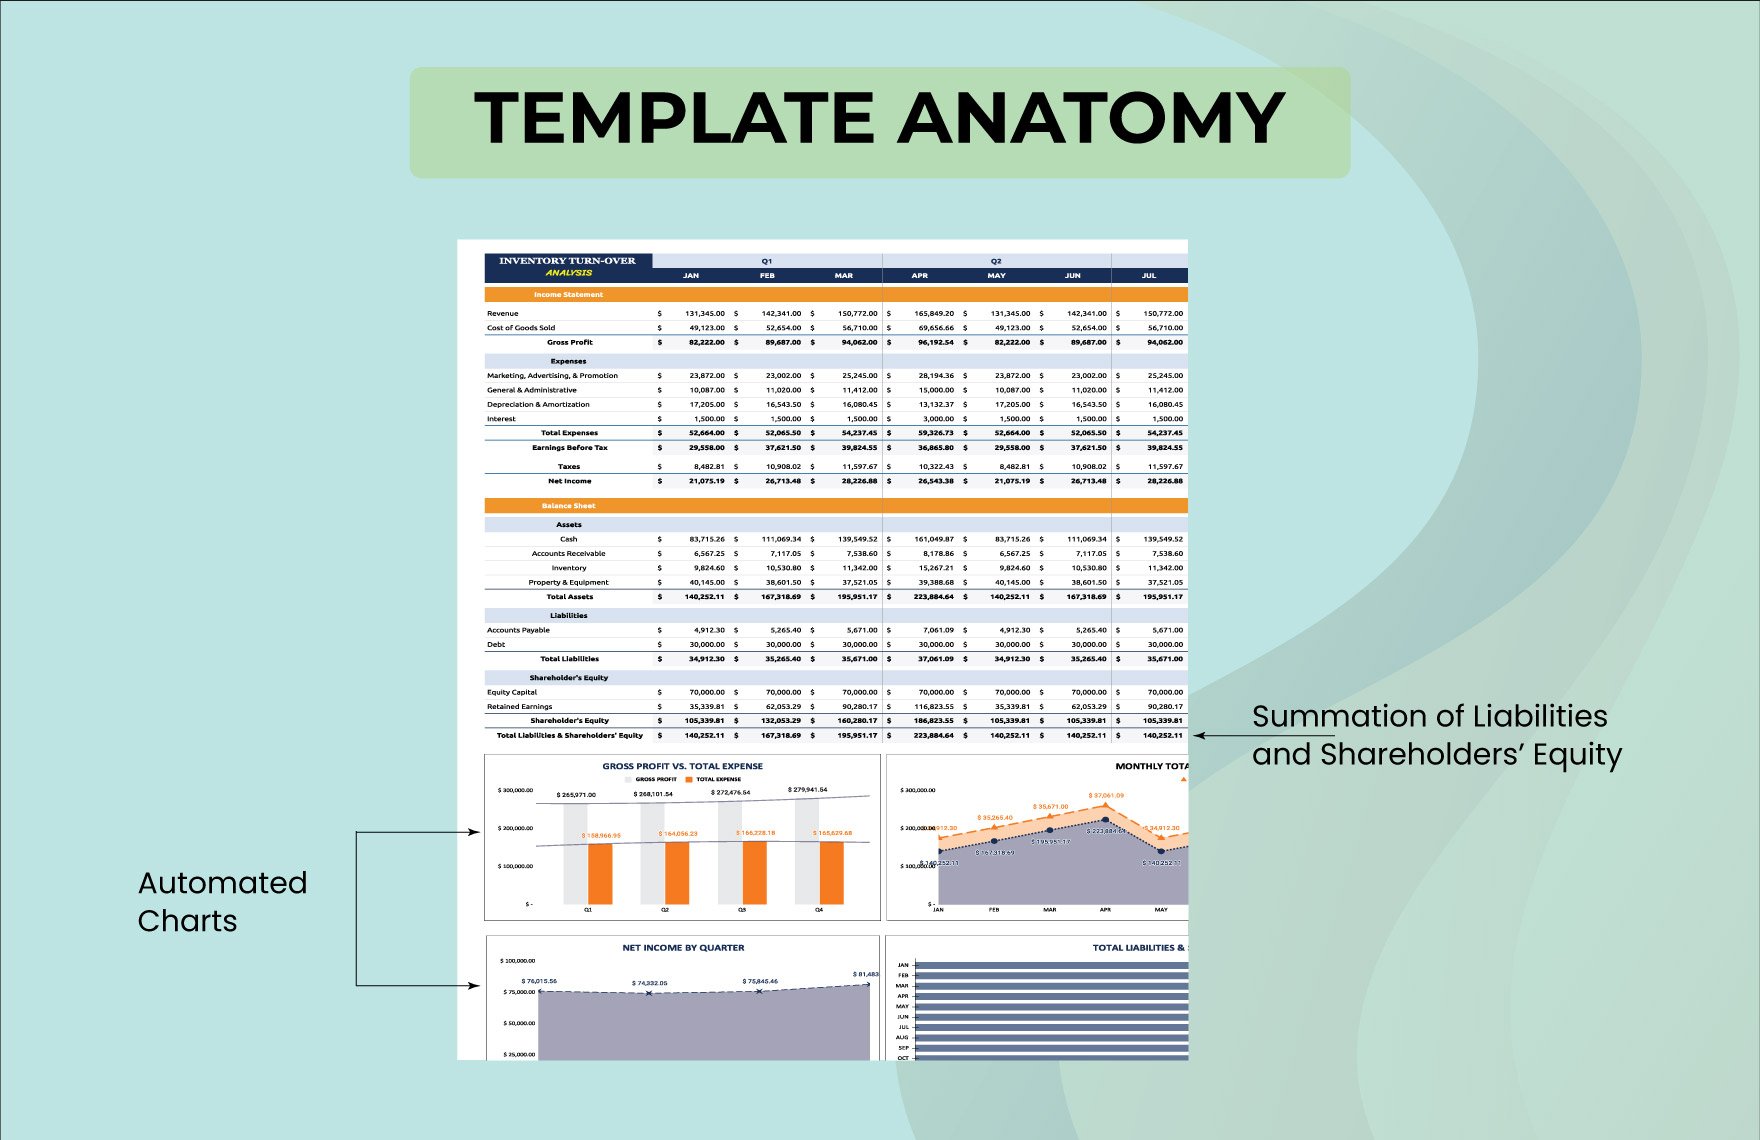 Inventory Turnover Analysis Template